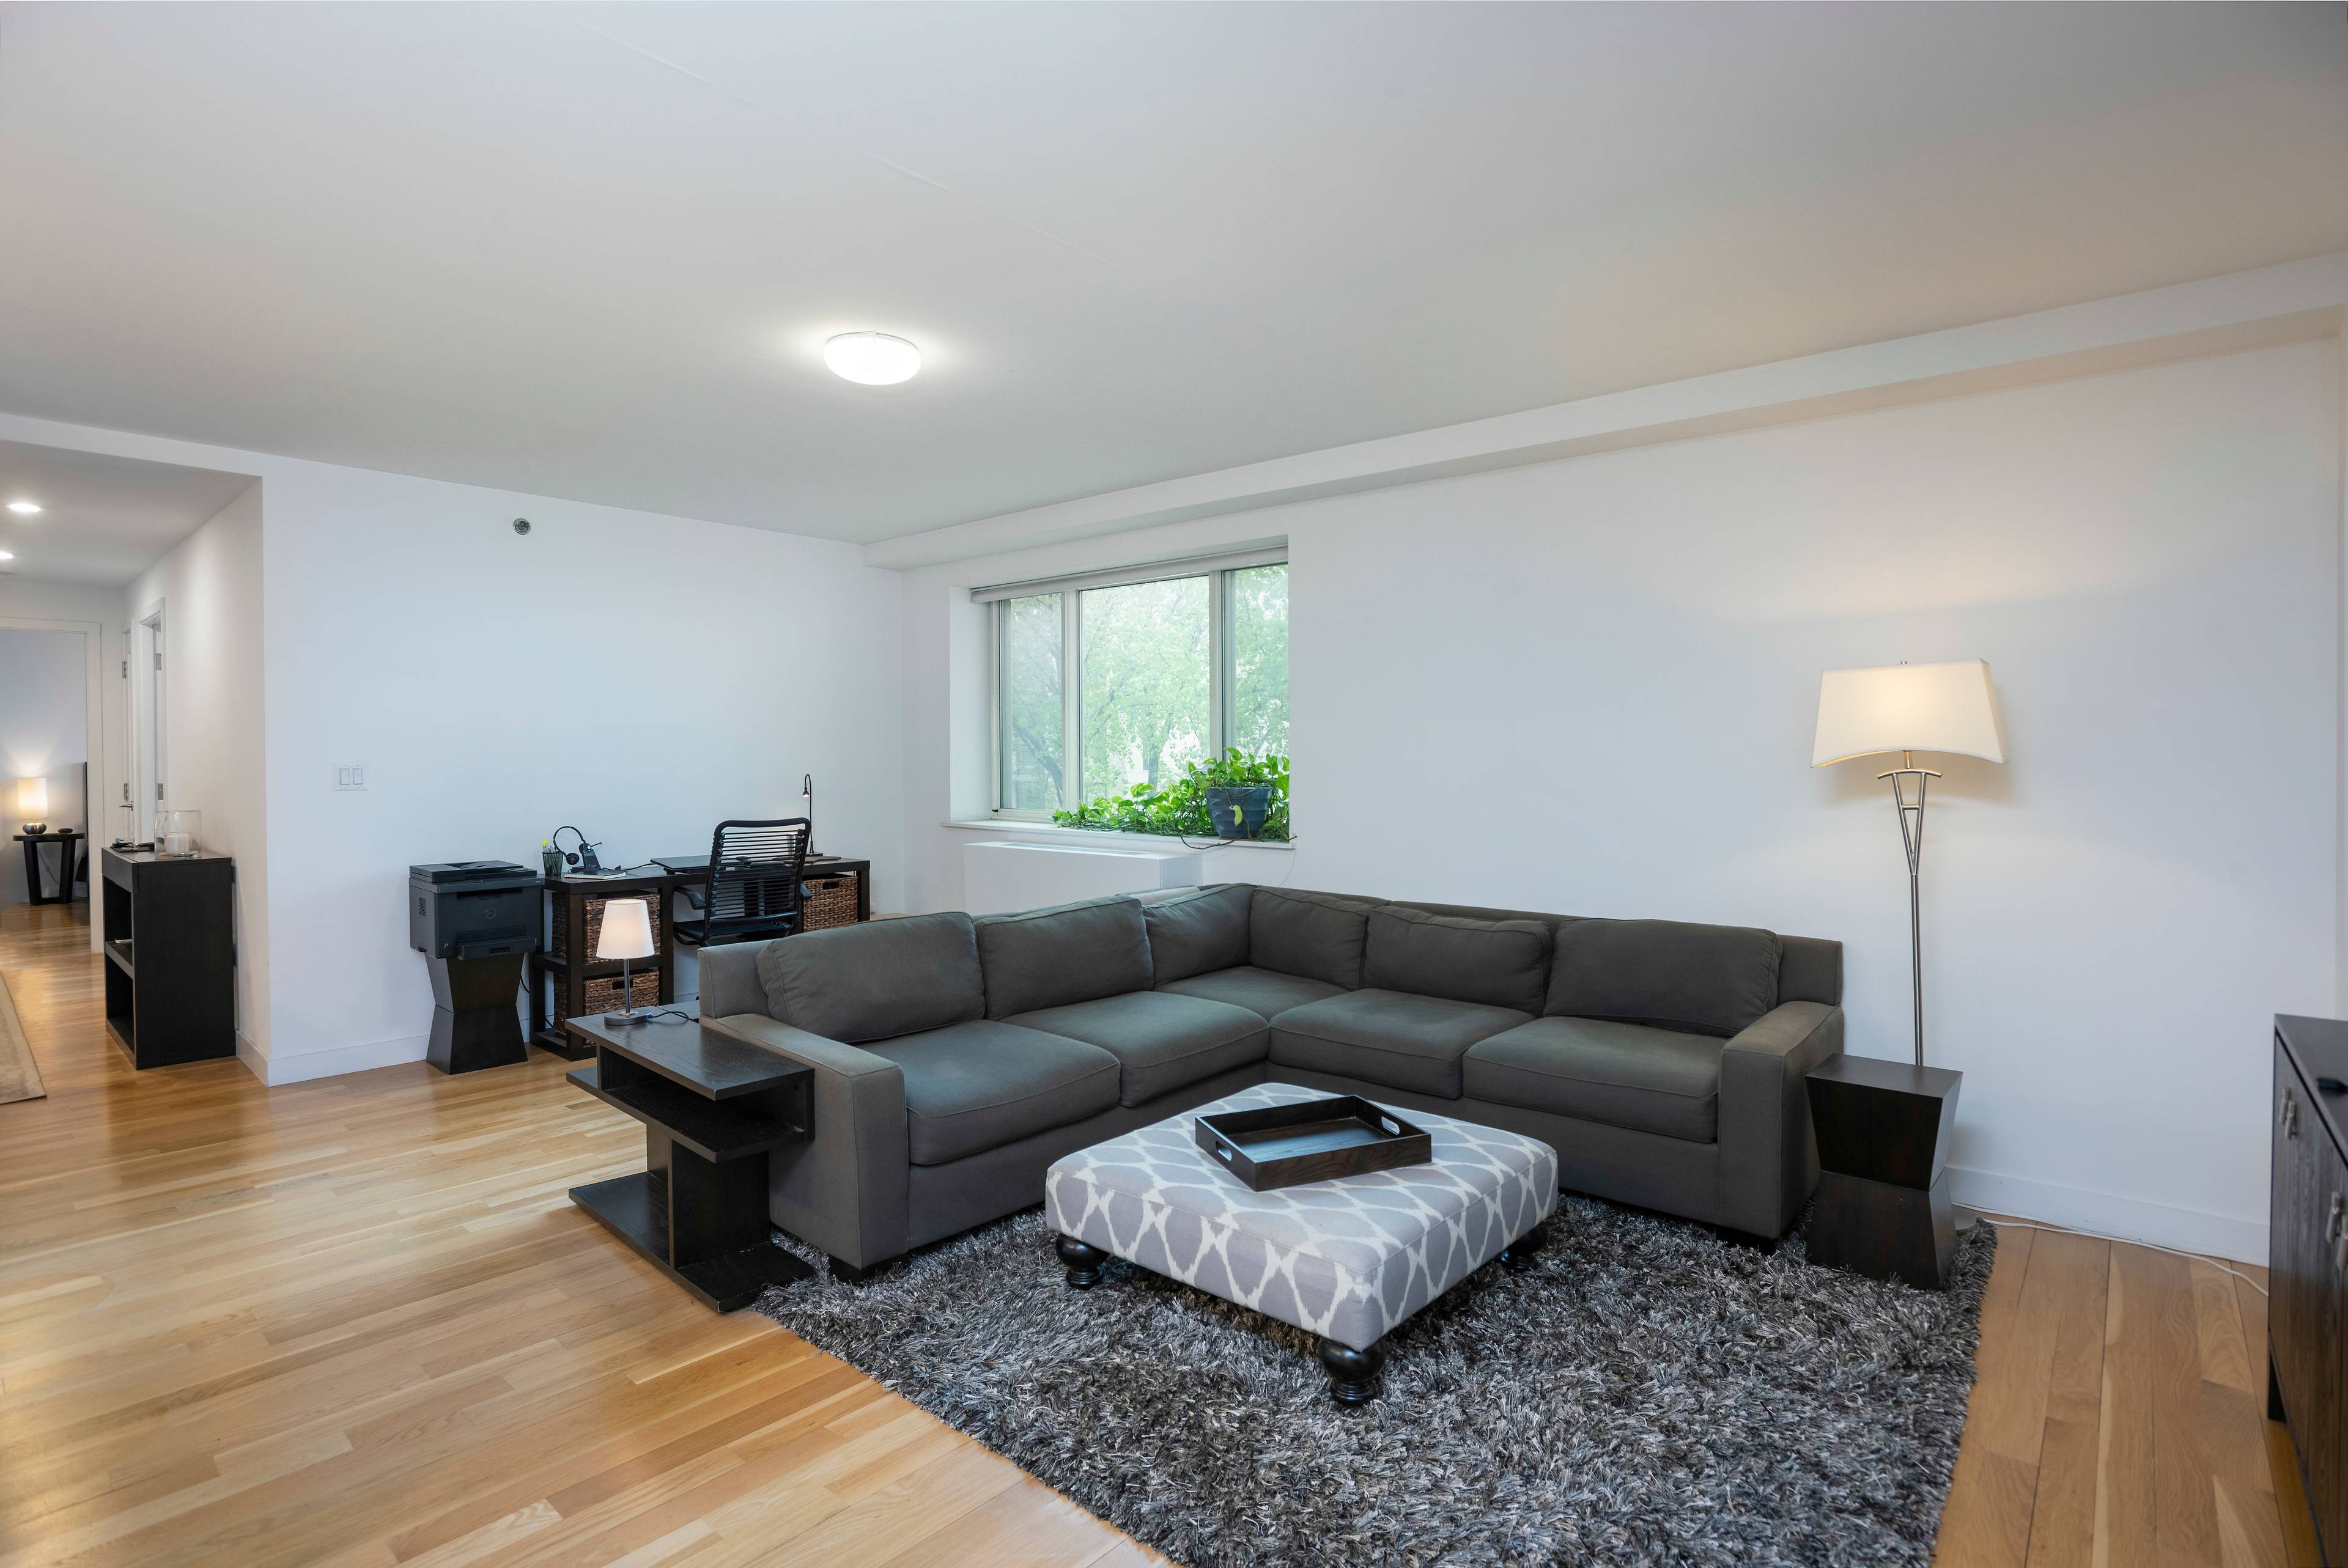 We are all looking for extra space to spread our wings and this beautifully designed 2 bedroom apartment with 2 full baths affords you that luxury.